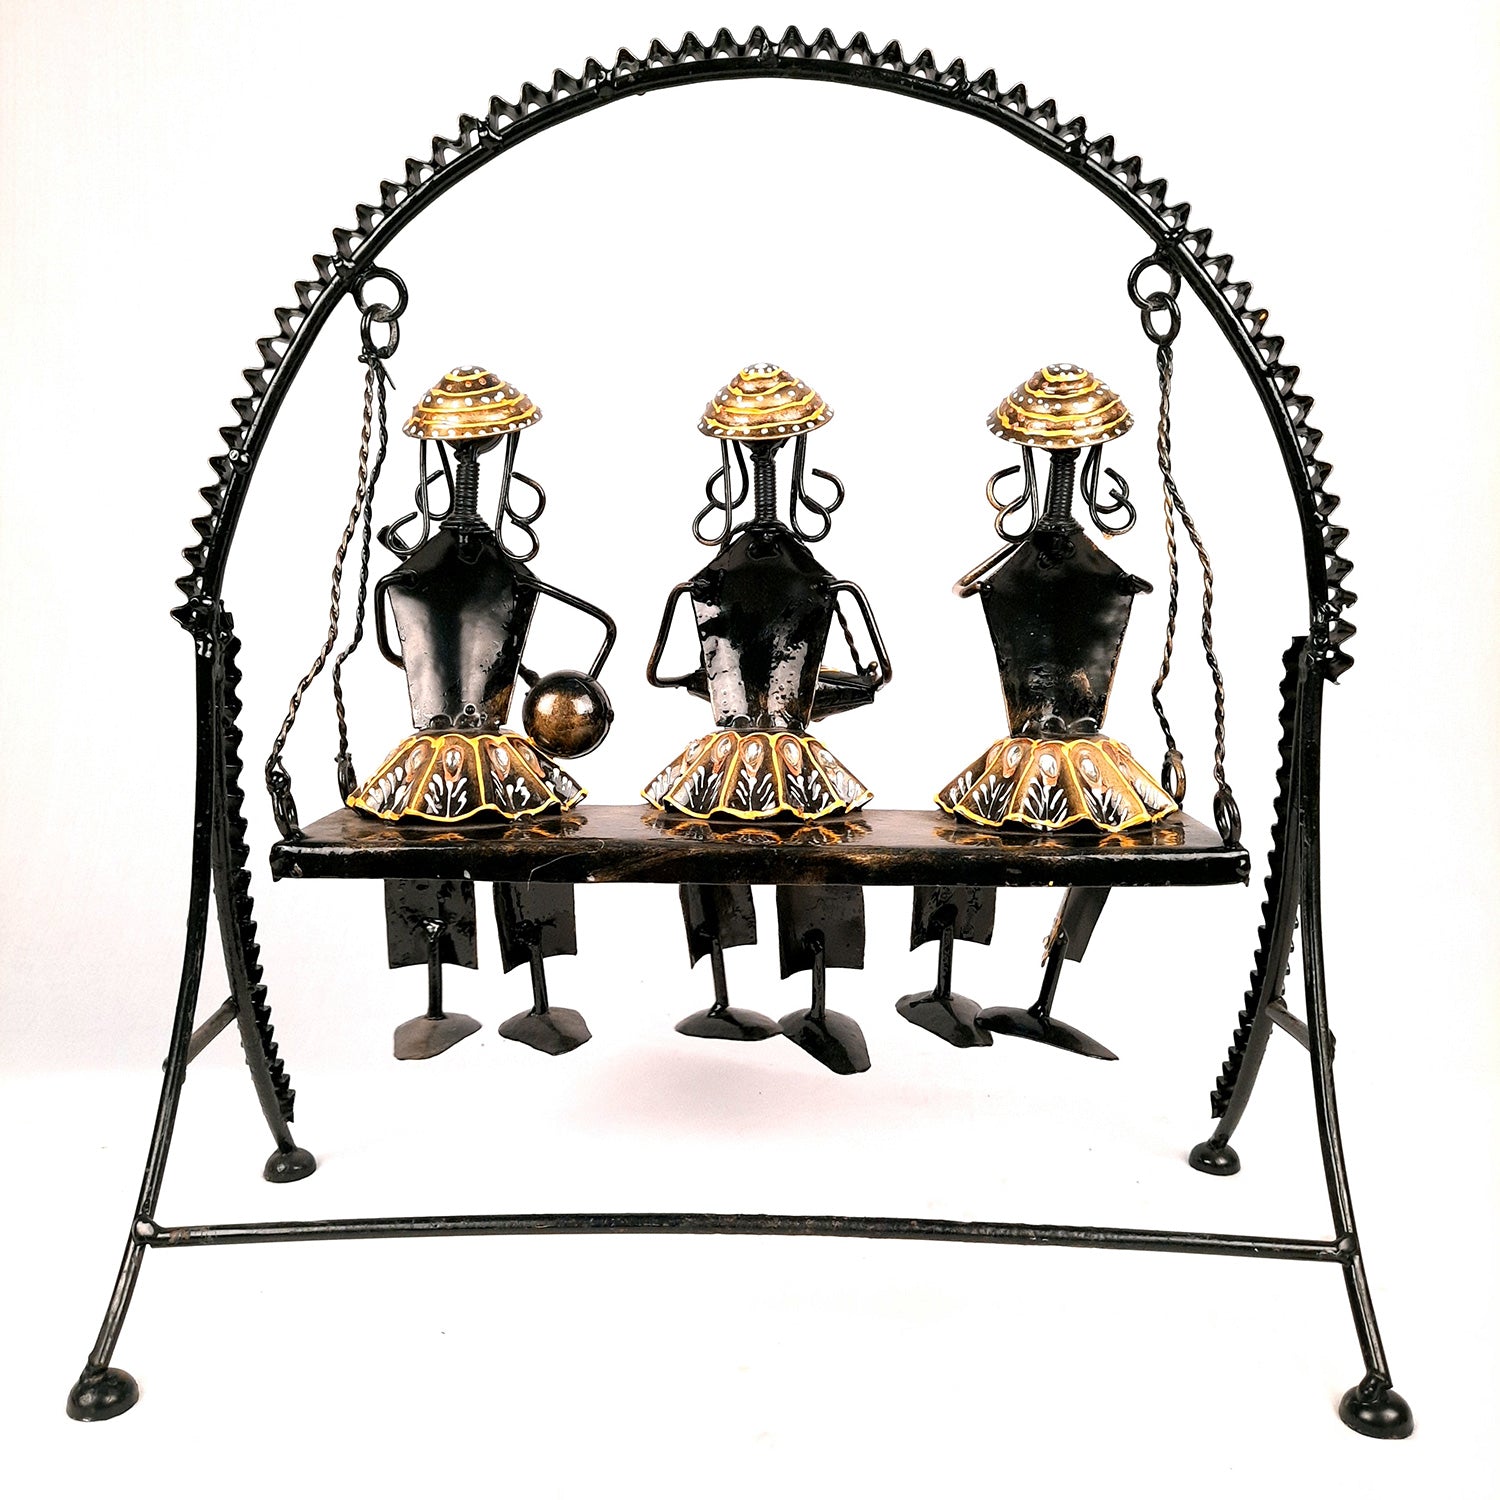 Musician Showpiece Sitting On Swing Design | Decorative Figurines With Hanging Legs - for Home, Bedroom, Living Room, Office Desk & Table Decor | Gifts For Wedding, Housewarming & Festivals - 15 Inch - Apkamart